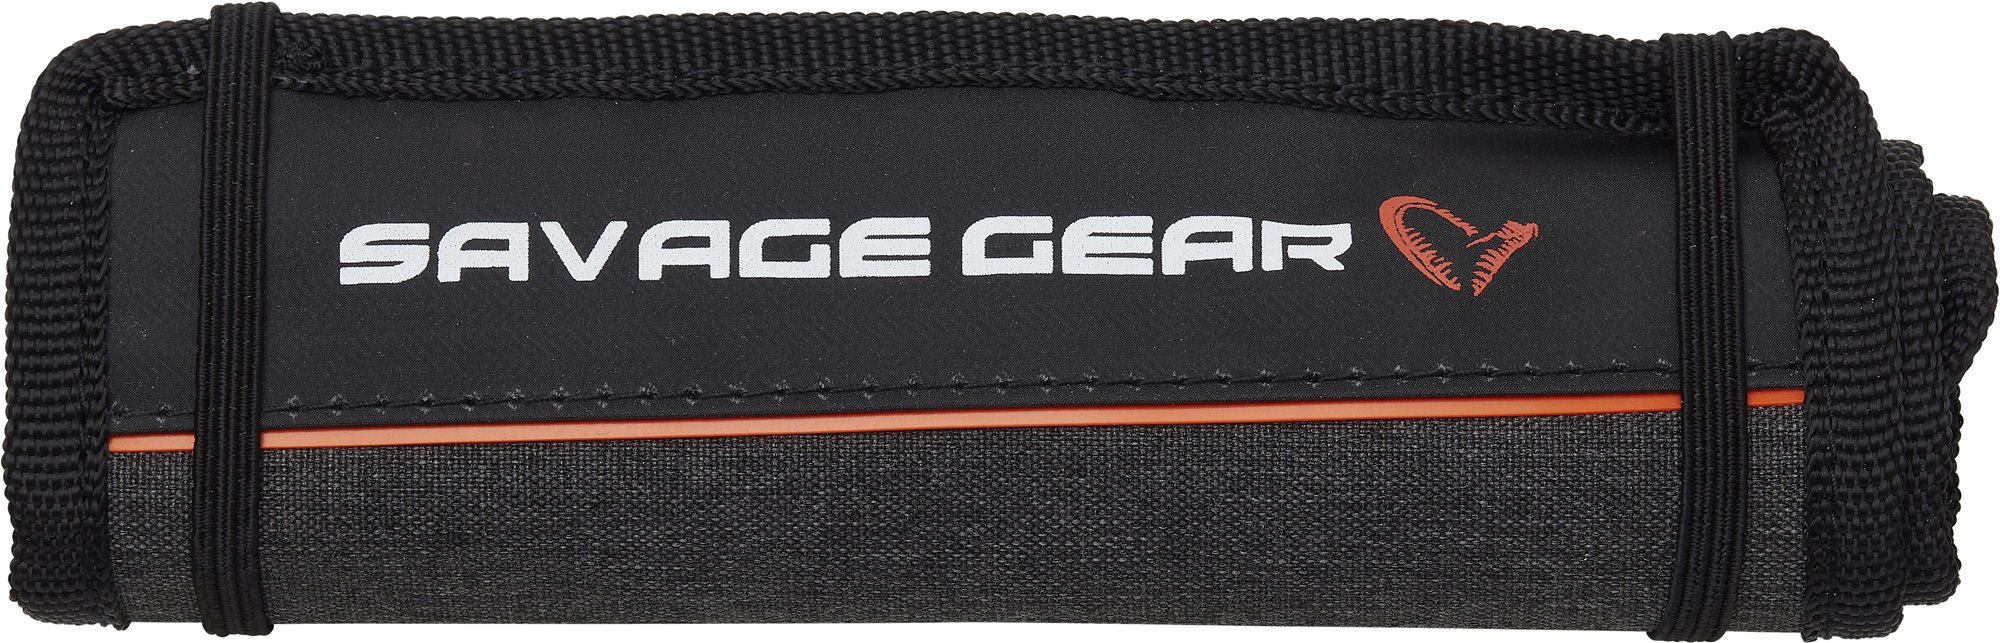 Savage Gear Roll Up Pouch Holds